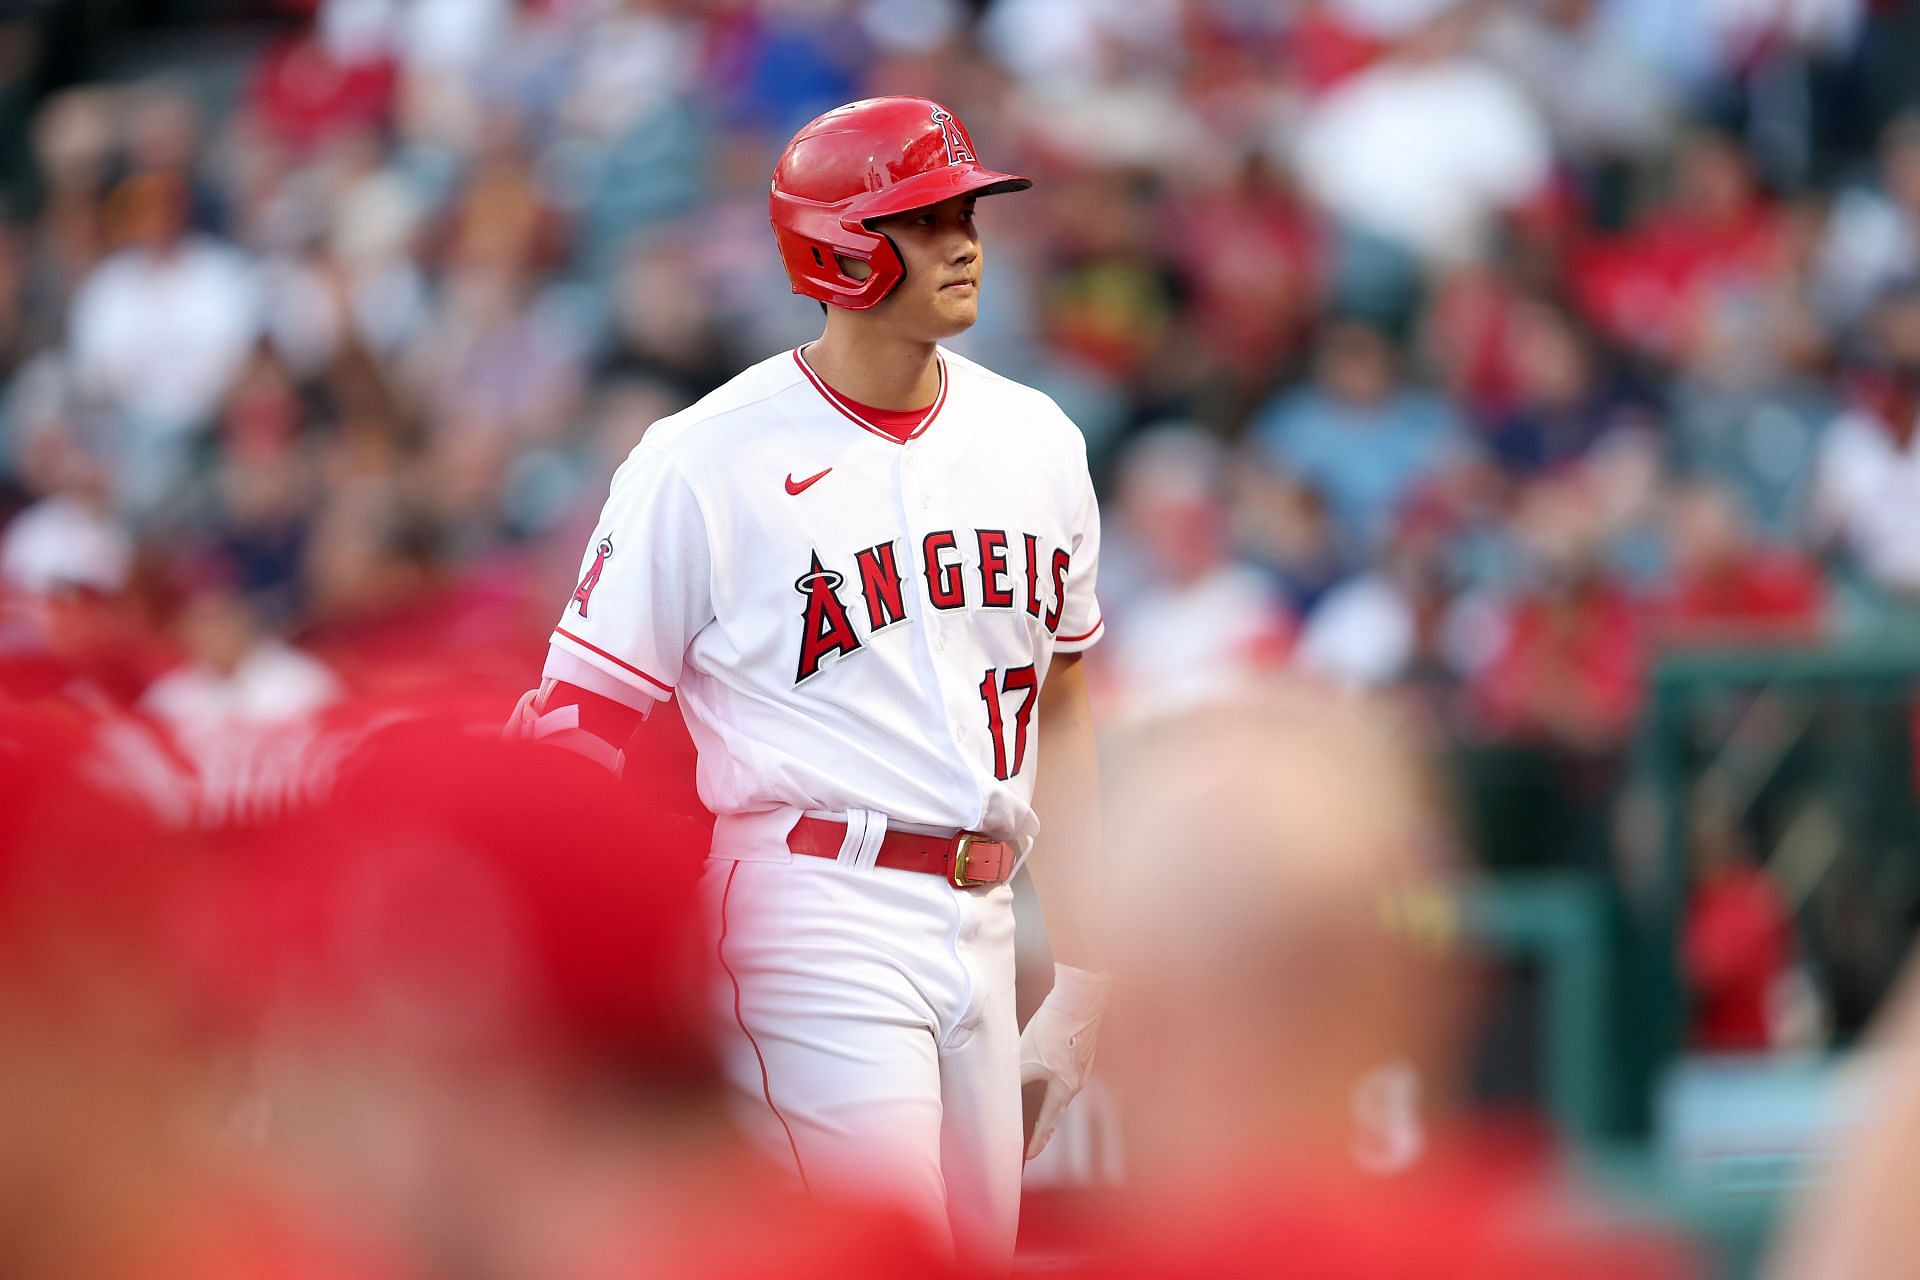 Los Angeles Angels dual-threat Shohei Ohtani is the reigning AL MVP. He&#039;s in a tight race with his teammate Mike Trout this season